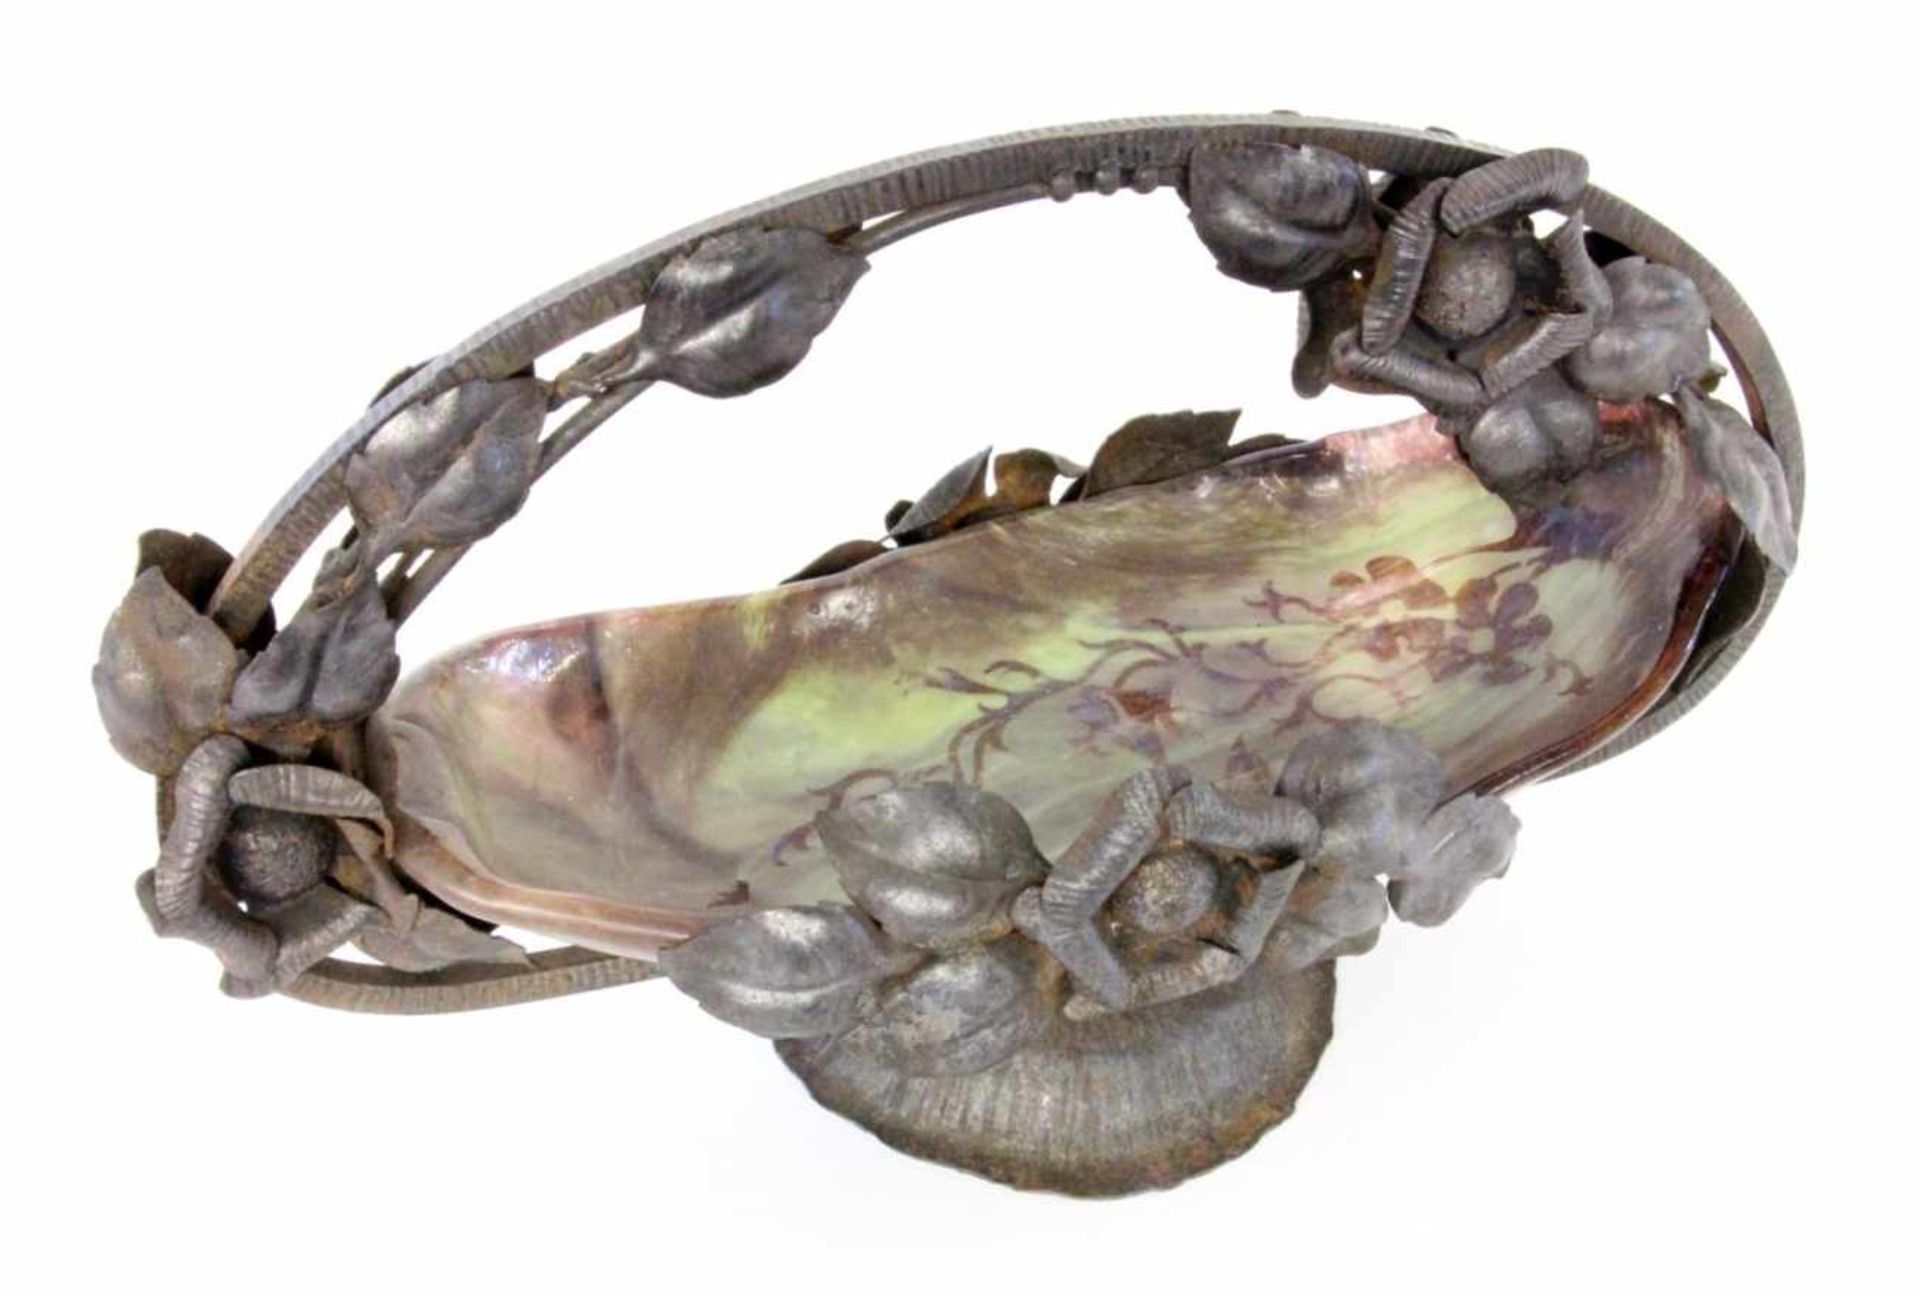 A DECORATIVE FRUIT BOWL Blackened iron frame with sculptural flowers. Inserted glass bowl